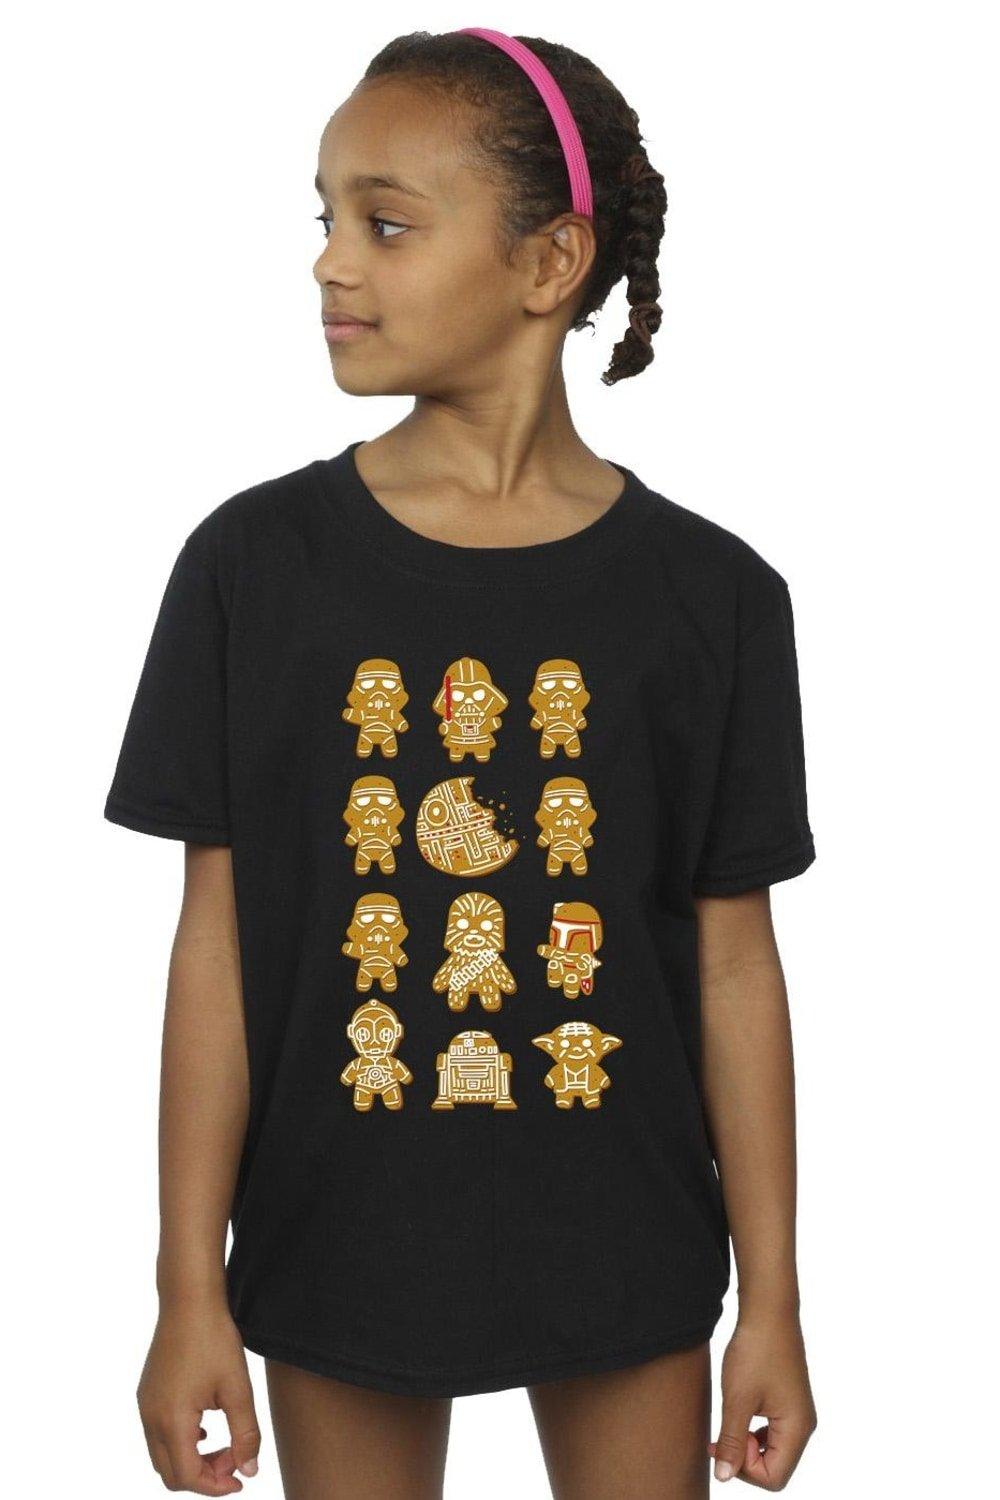 Episode IV: A New Hope 12 Gingerbread Cotton T-Shirt